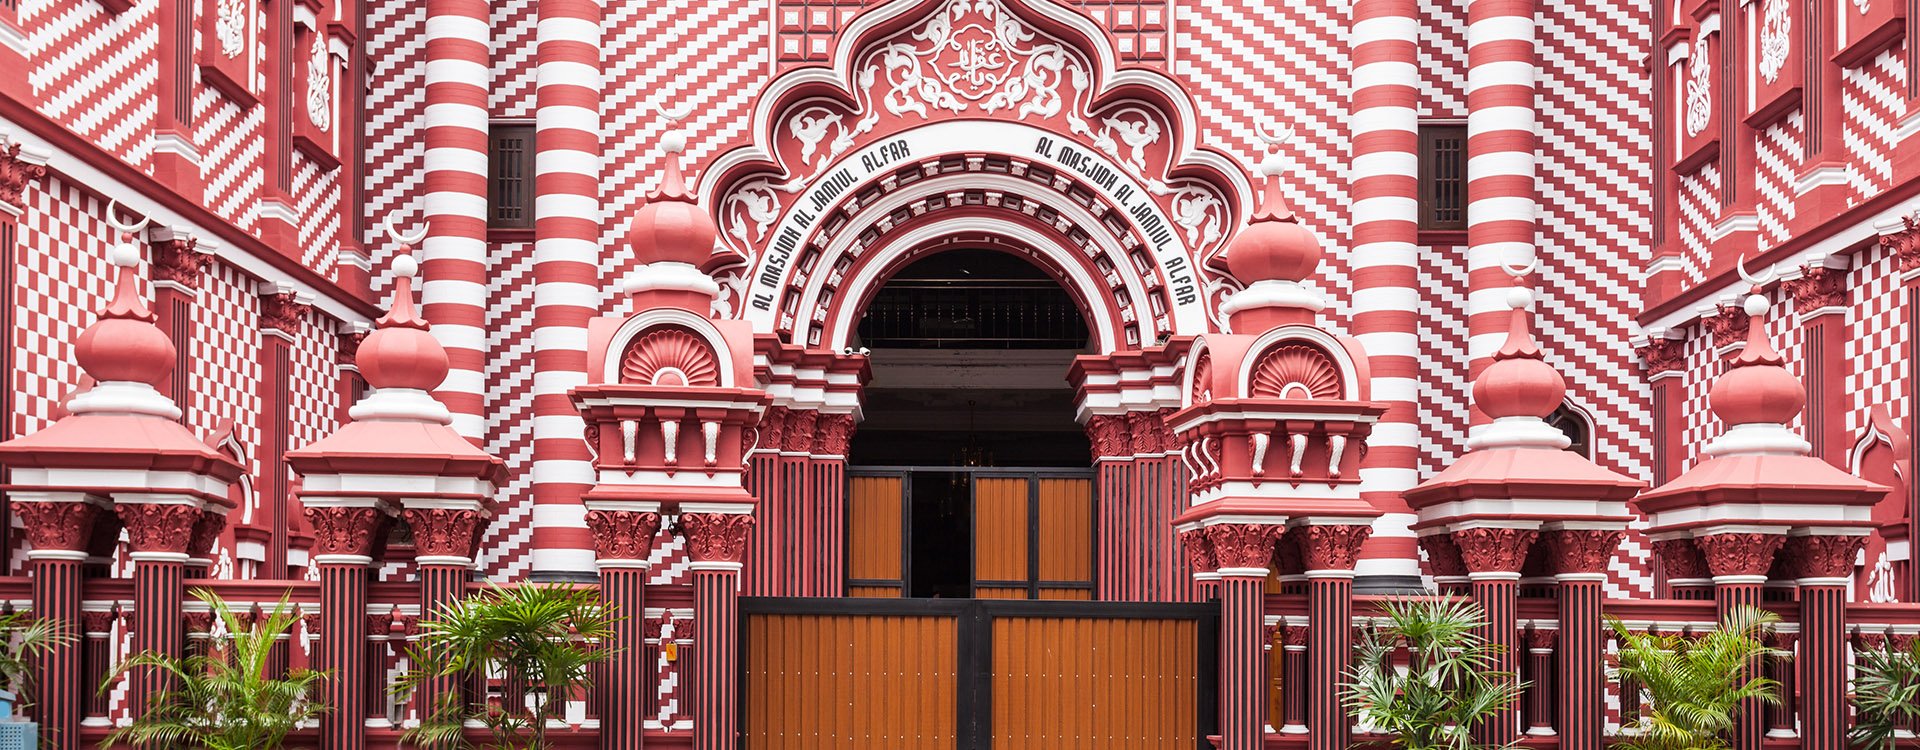 Jami-Ul-Alfar Mosque or Red Masjid Mosque is a historic mosque in Colombo, capital of Sri Lanka